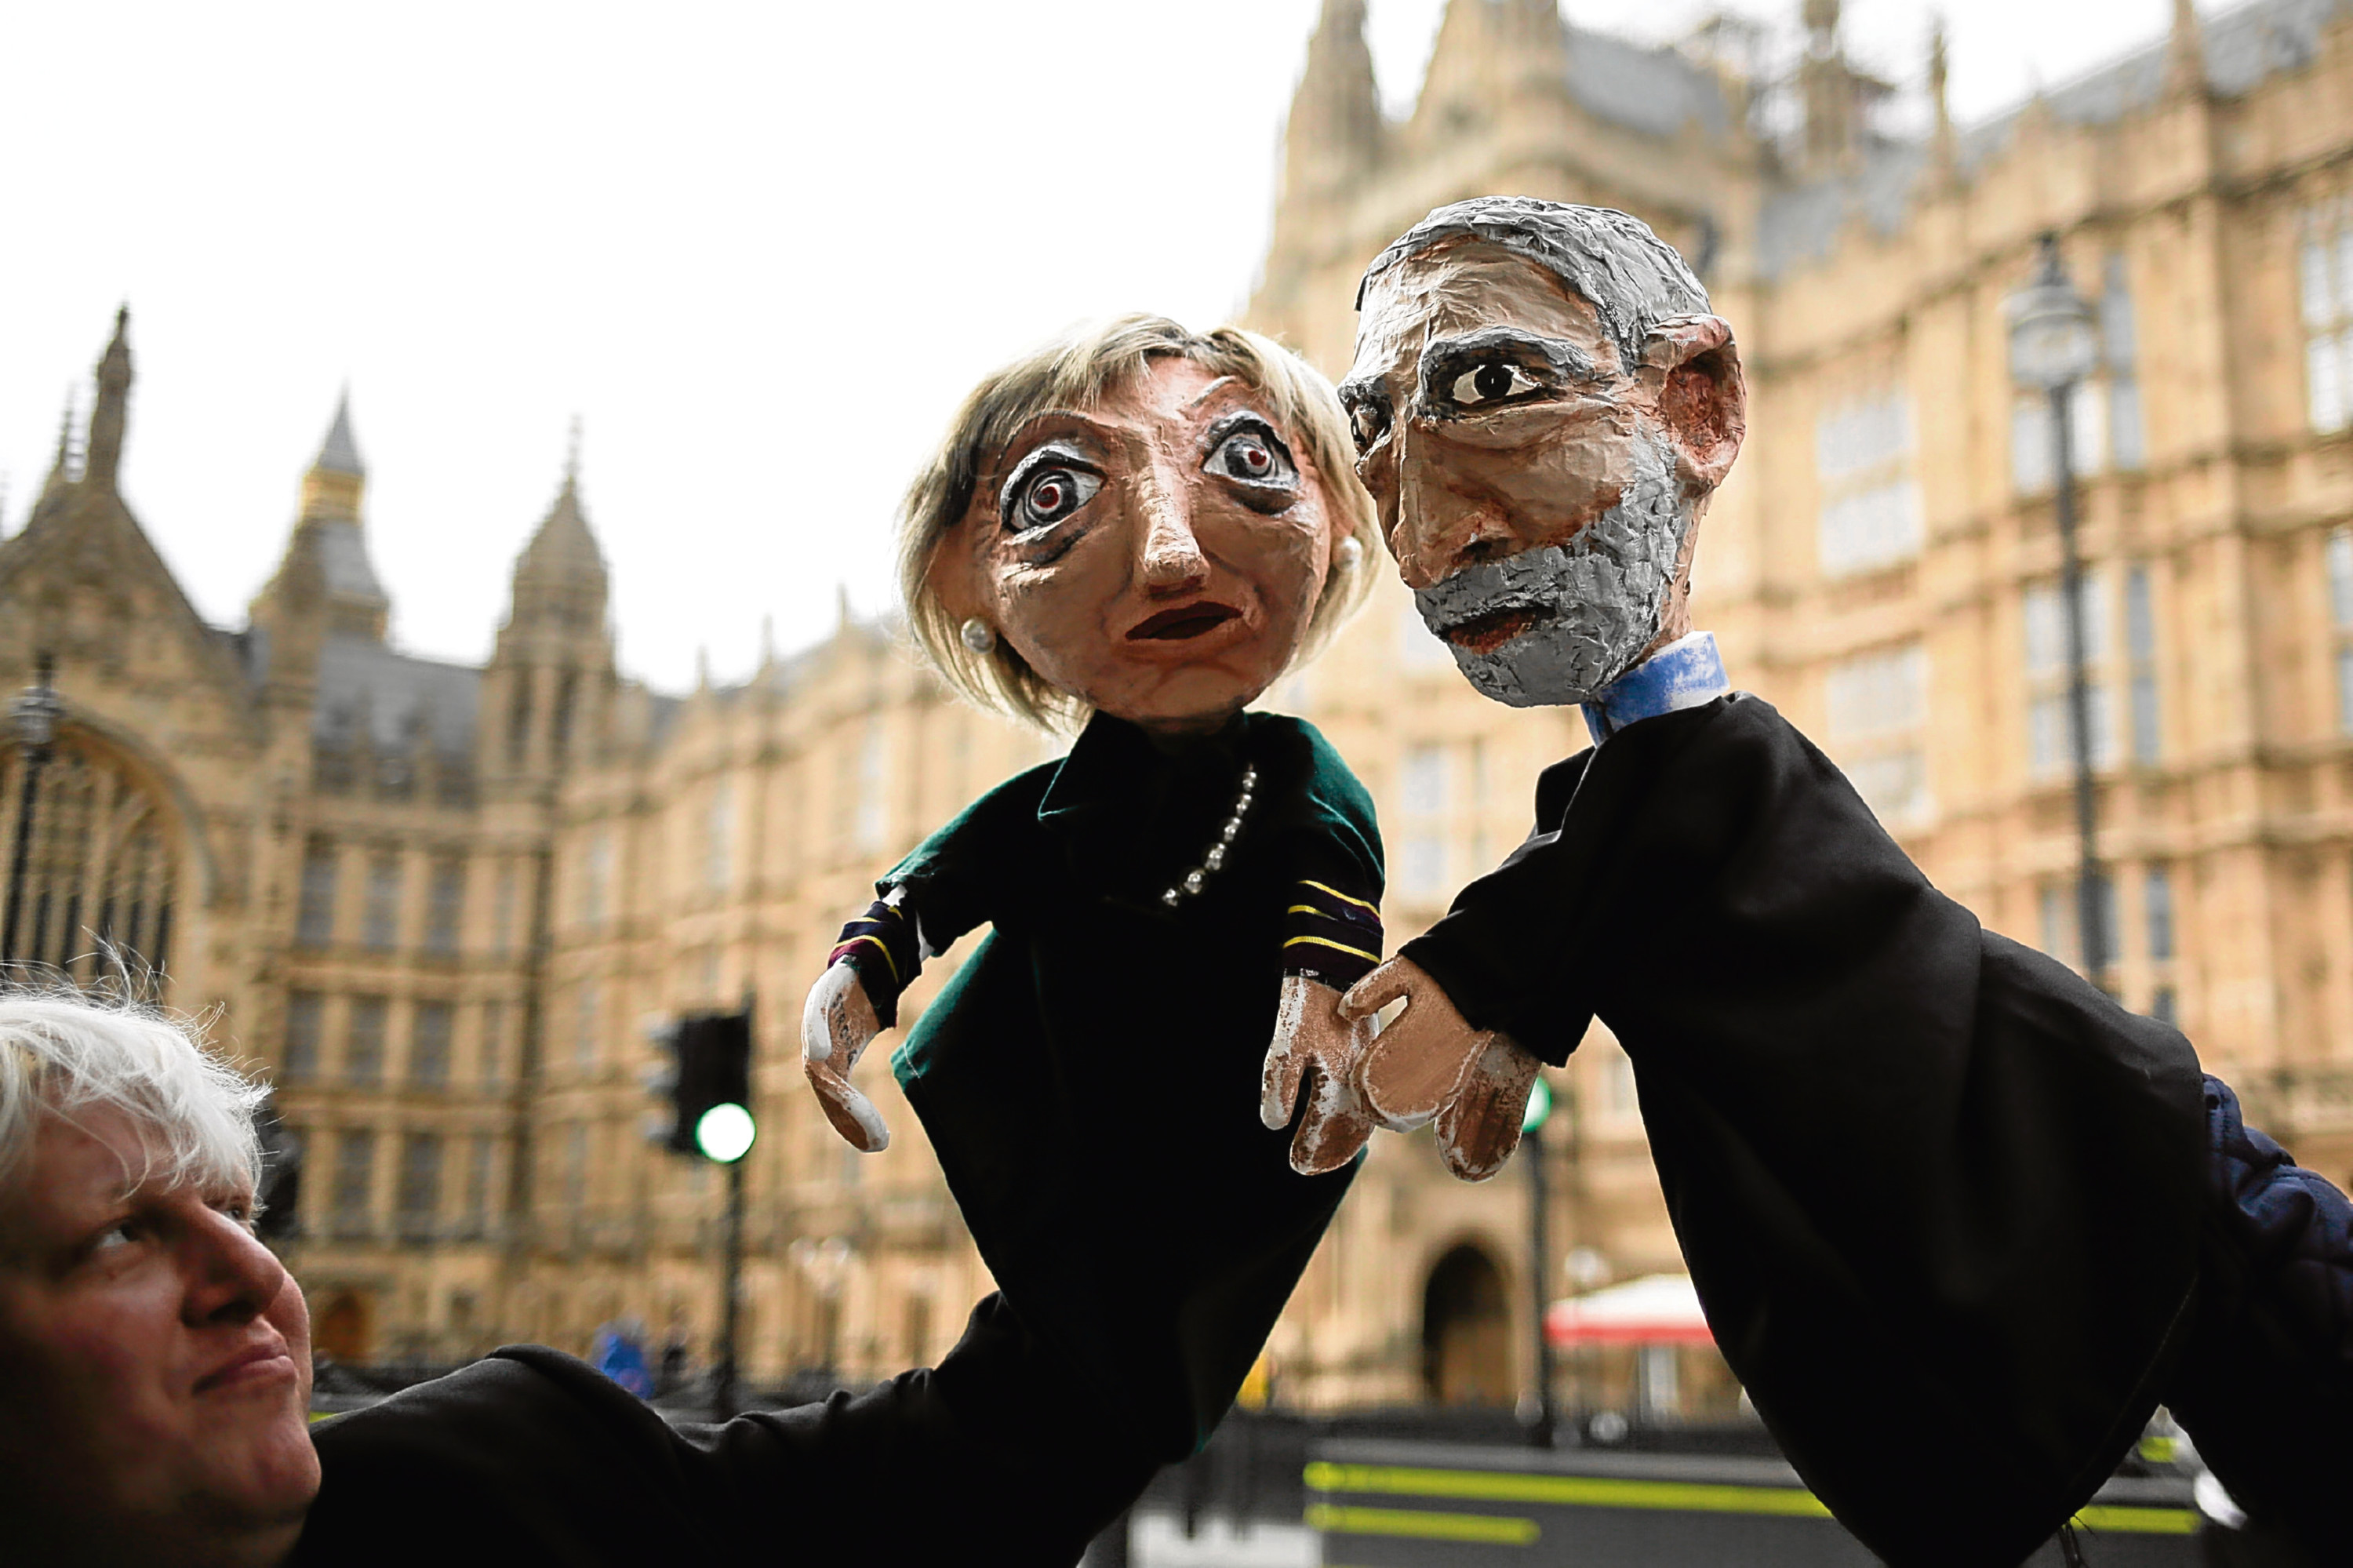 Two anti-Brexit activists pose with their hand-puppets depicting British Prime Minister and leader of the Conservative party Theresa May, left, and Britain's Labour party leader Jeremy Corbyn, in front of the Houses of Parliament. (AP Photo/Markus Schreiber)